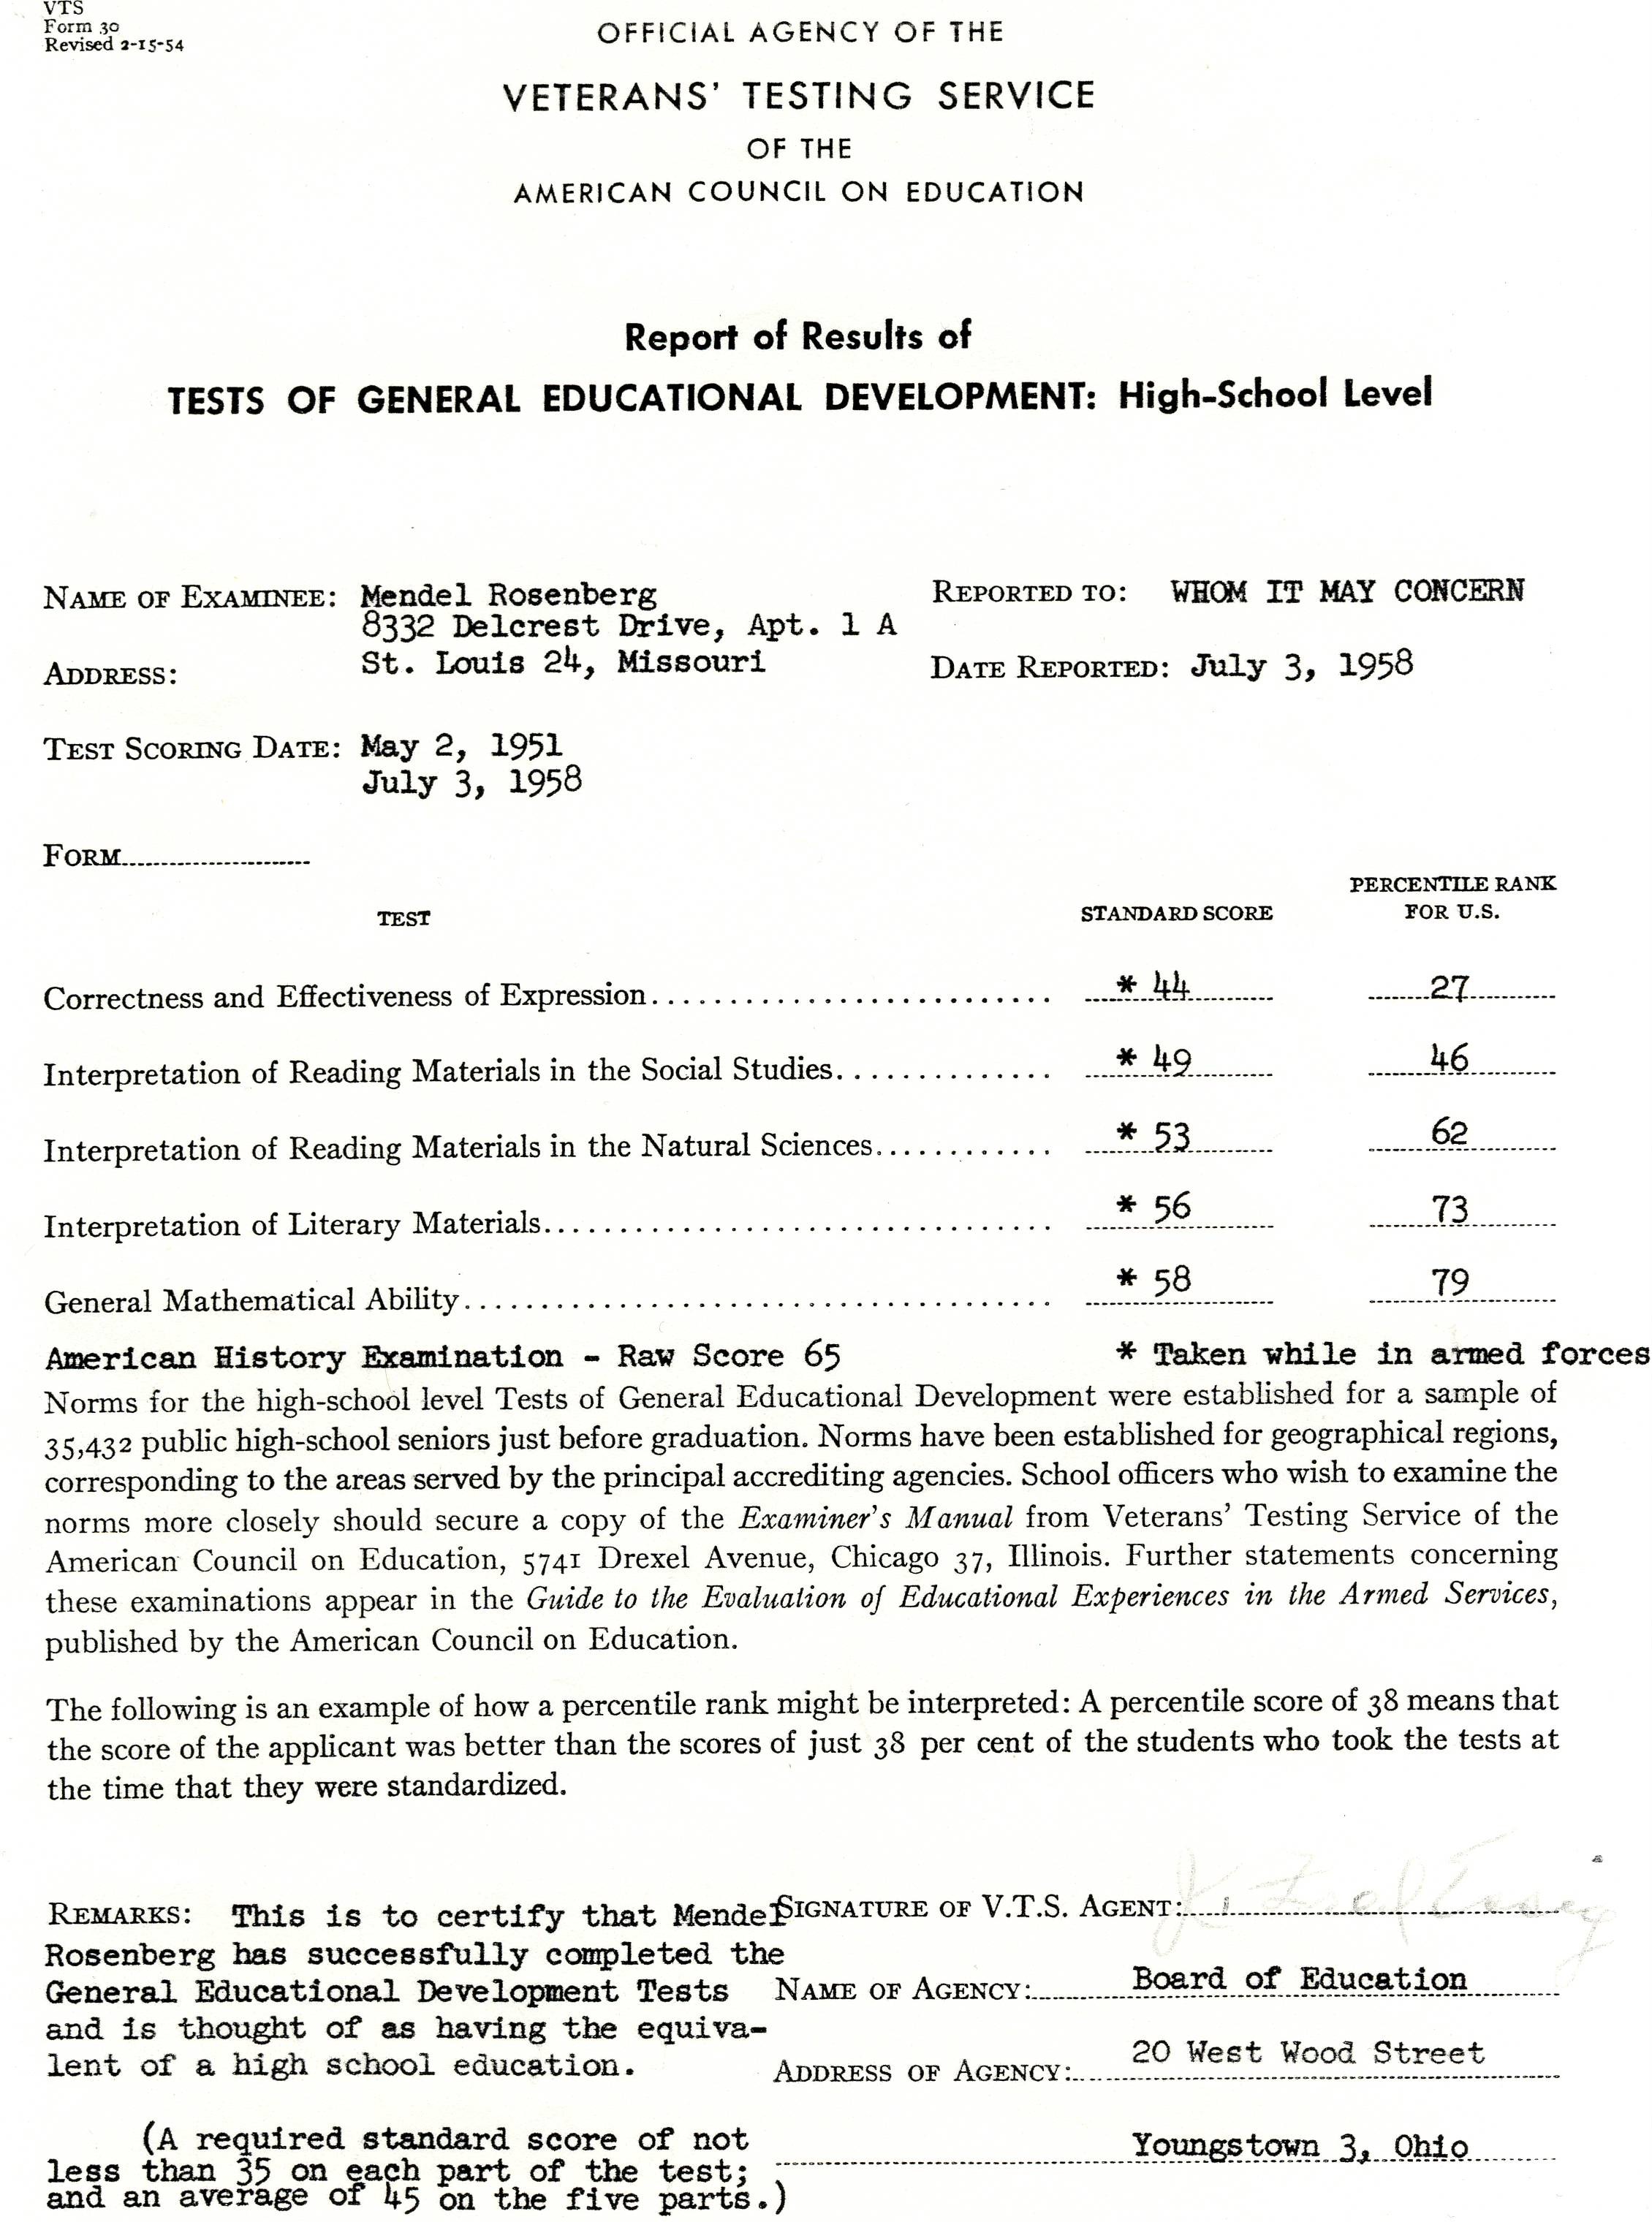 GED Test Results 1958